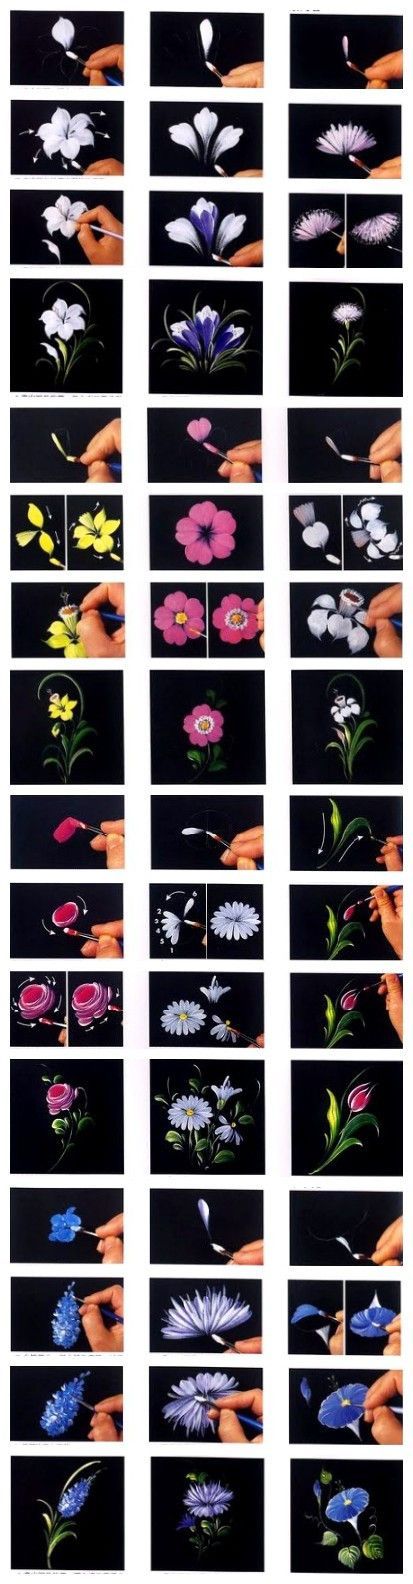 12 excellent ways to hand paint flowers